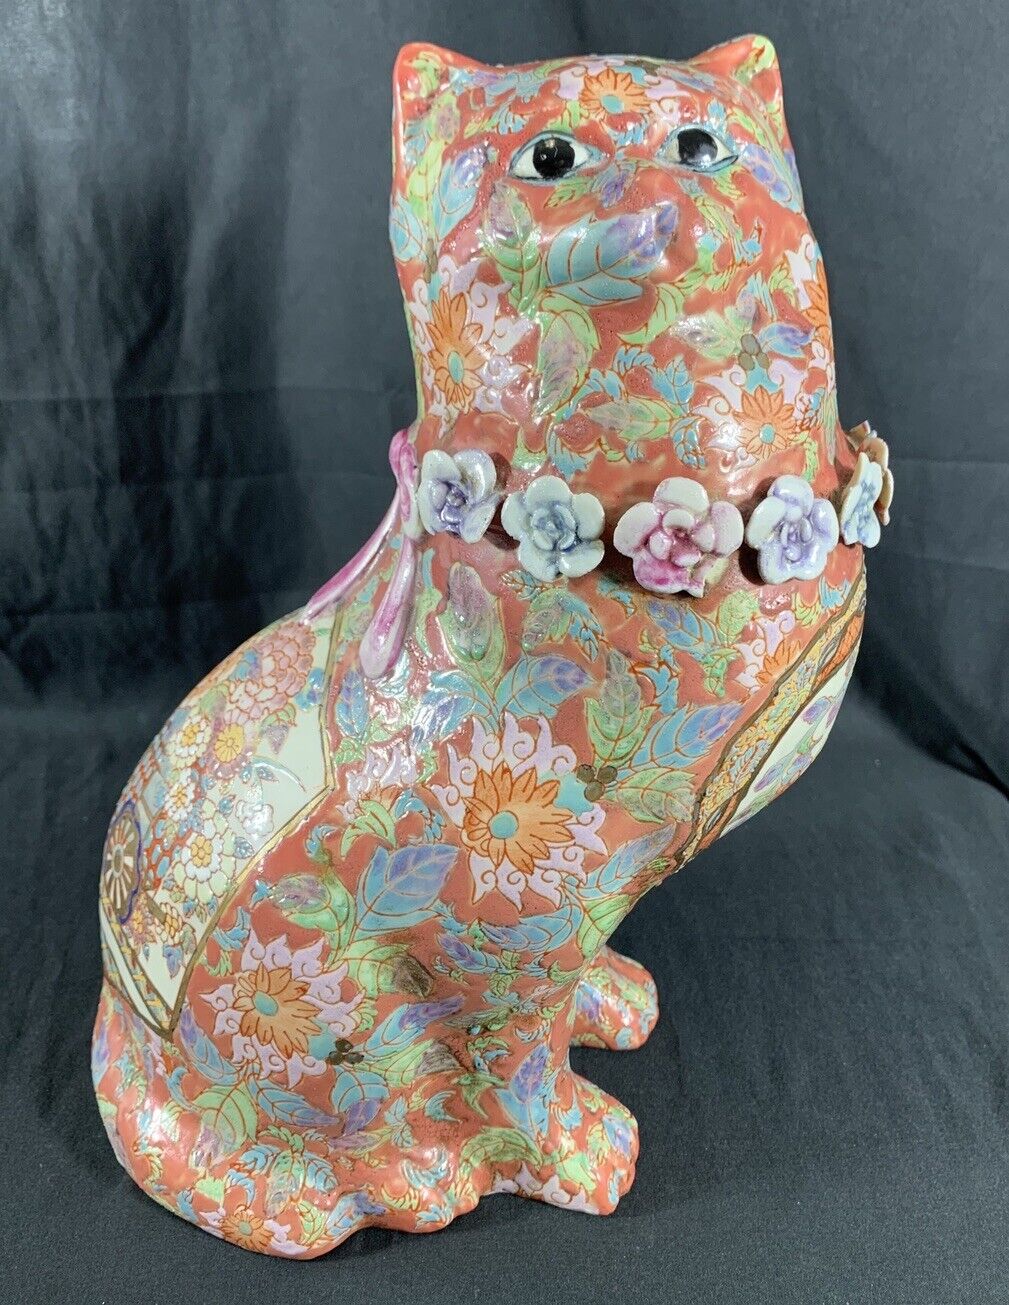 ✨Vintage Chinese Asian Oriental Hand Painted Cat Figurine Floral Ceramic 11.5”✨